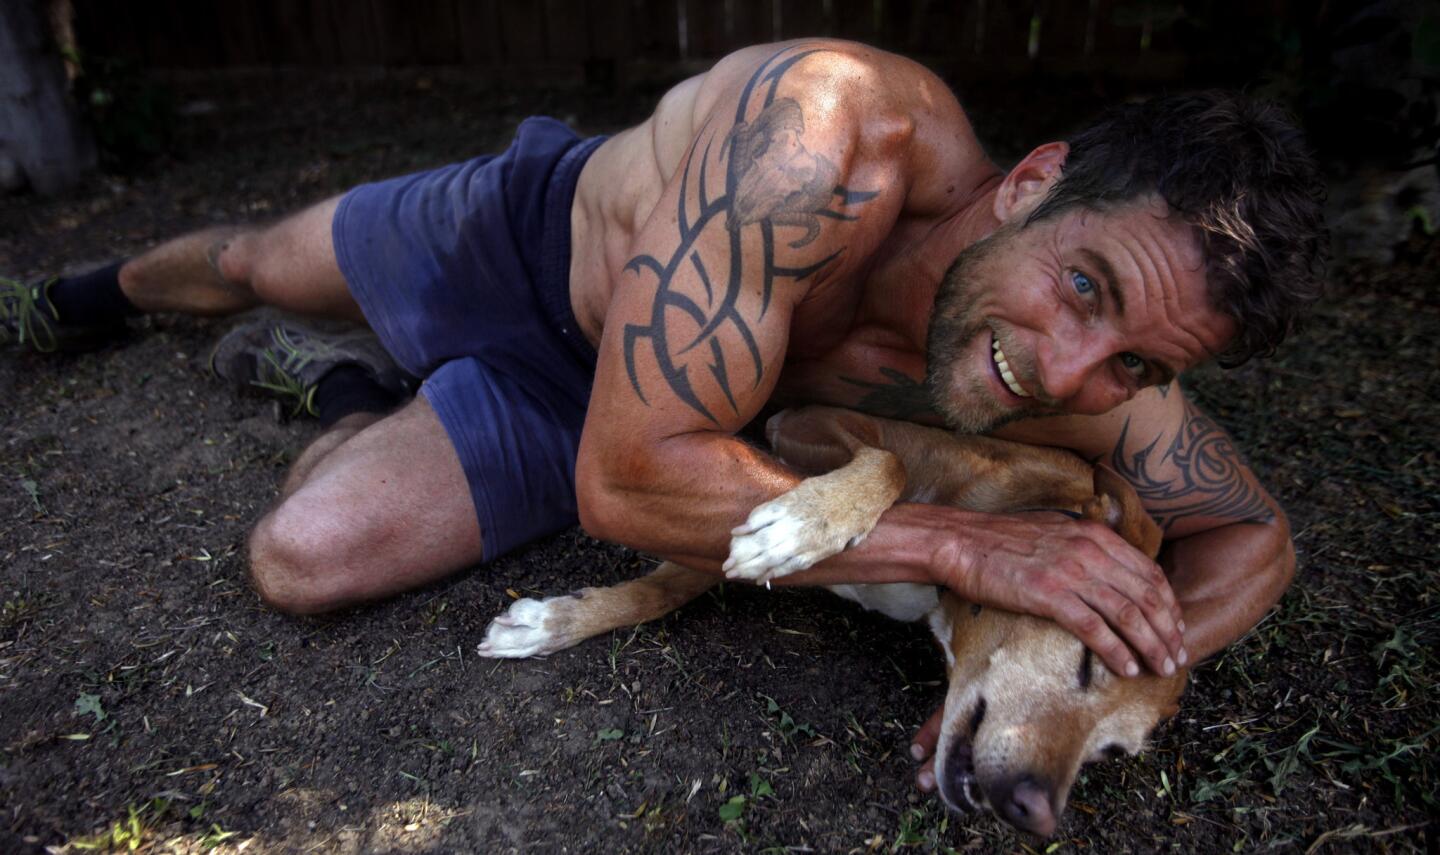 Actor Damien Puckler spends a warm moment with his dog Roxy in the backyard of his home in Van Nuys. Puckler most recently can be seen in the television series "Grimm." He has been in the films "30,000 Leagues Under the Sea," "The Man Who Cried" and "Death Factory."